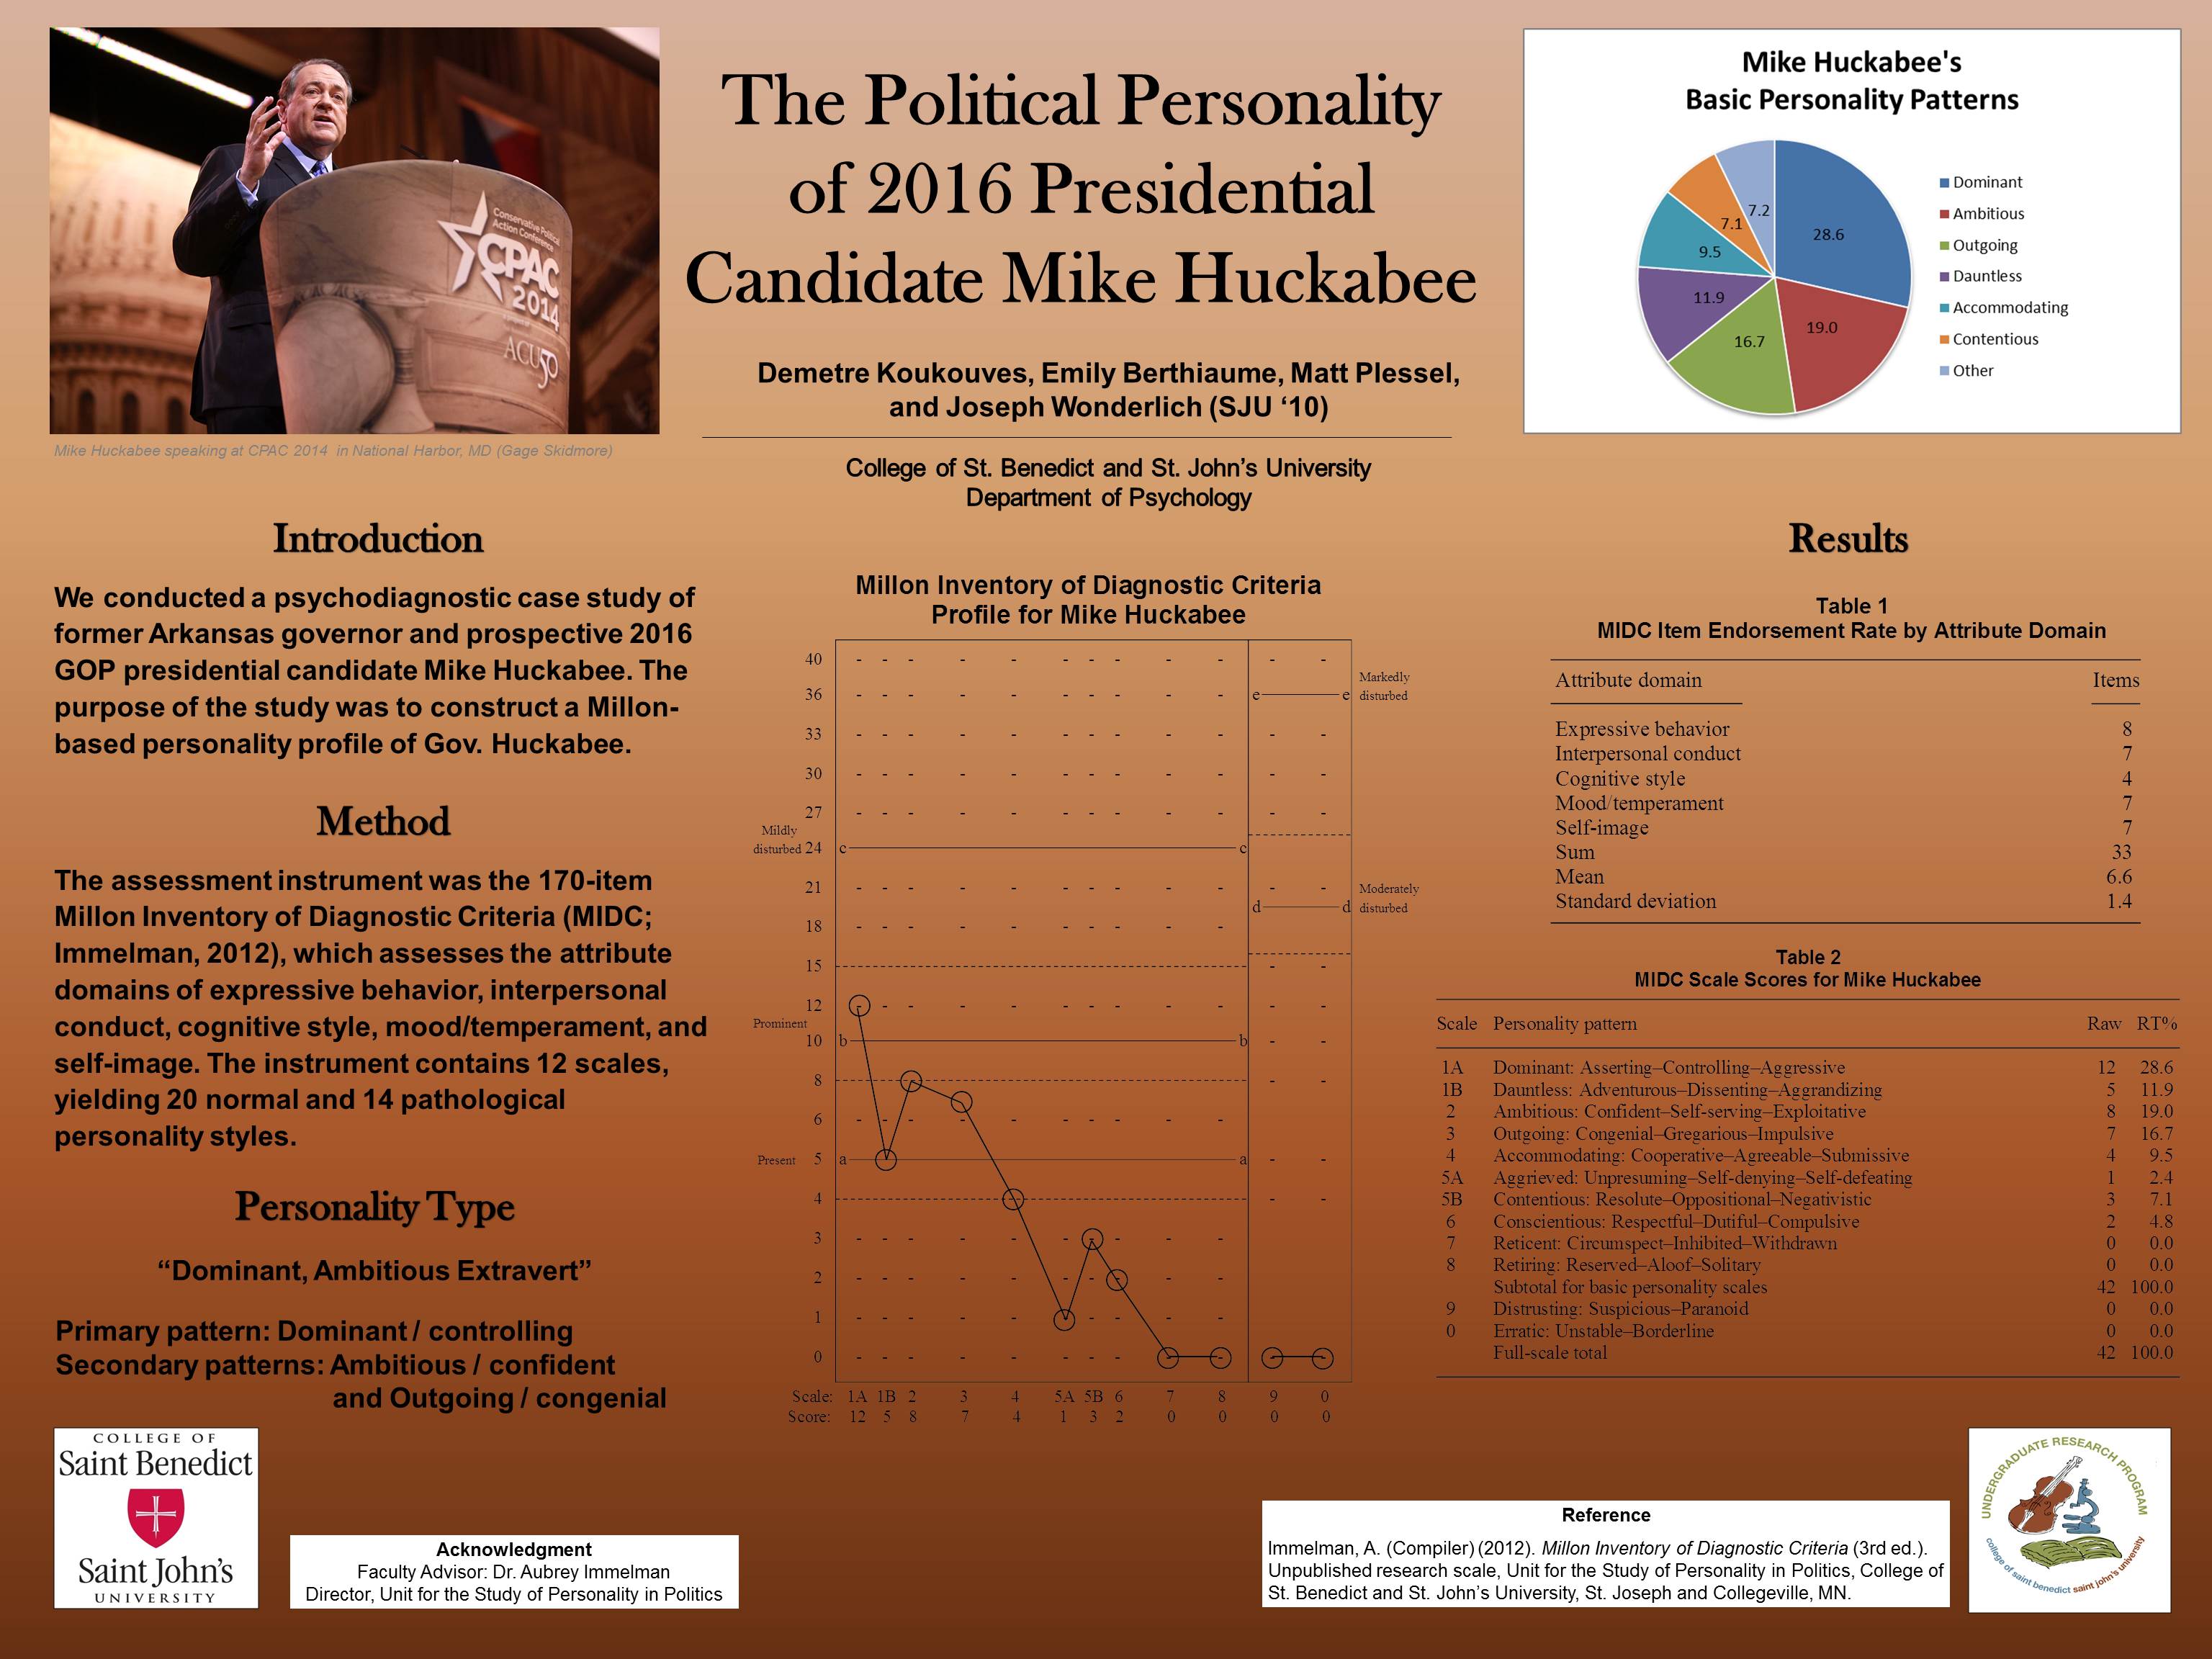 Poster detailing the Personality Profile of Prospective 2016 Presidential Candidate Mike Huckabee